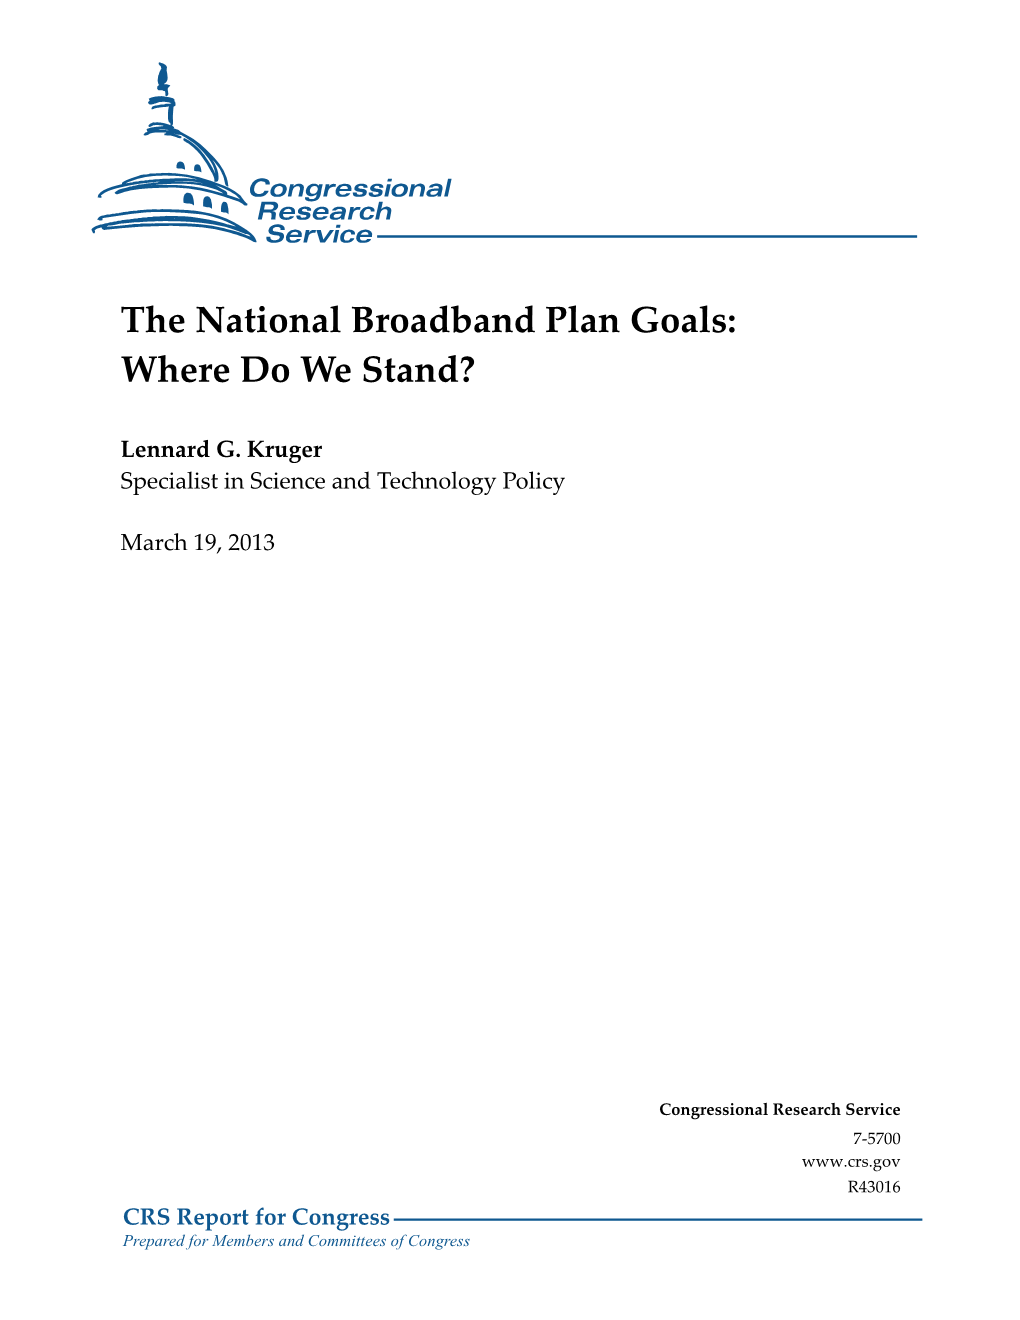 The National Broadband Plan Goals: Where Do We Stand?